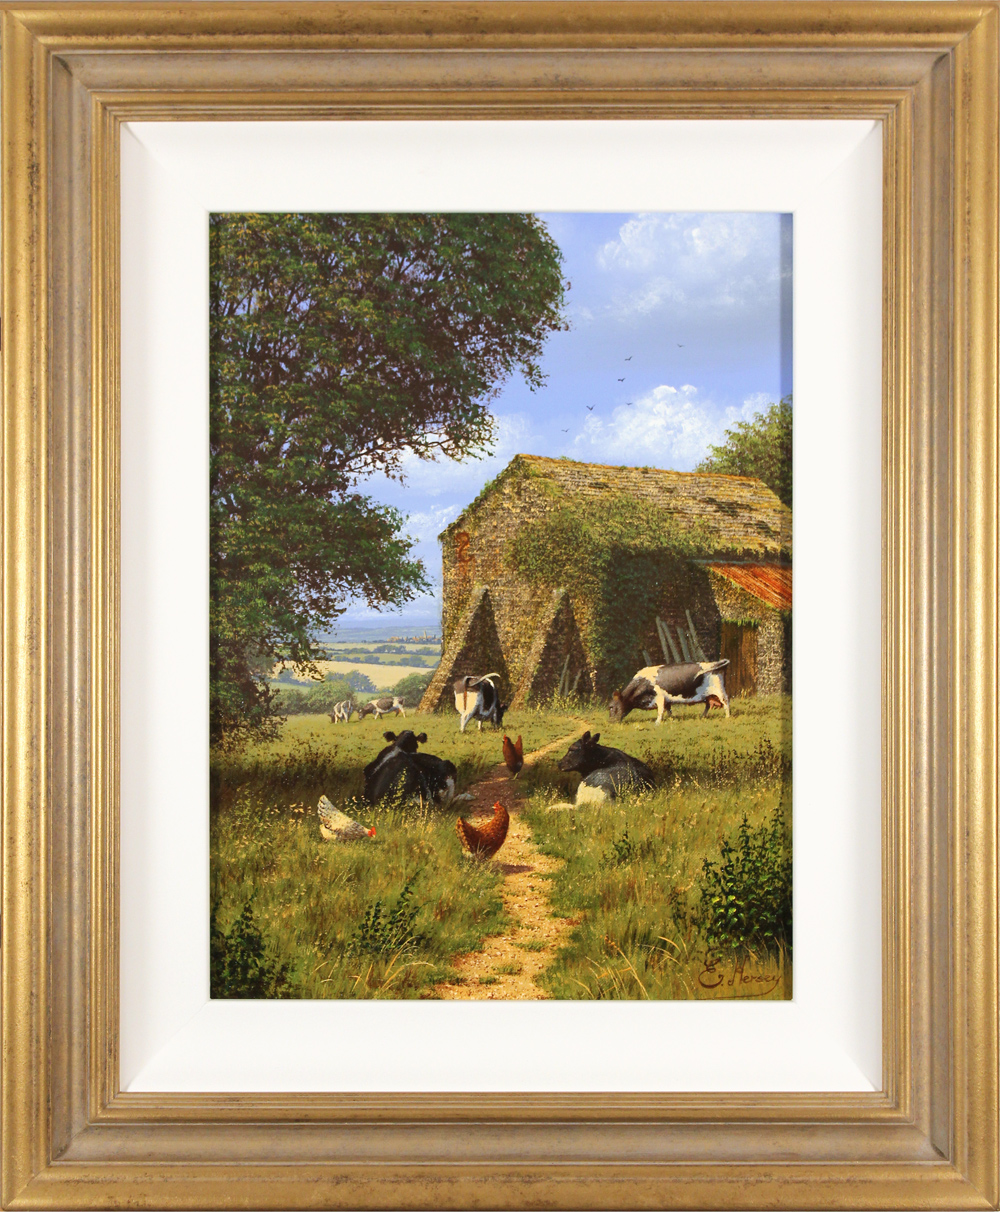 Edward Hersey, Original oil painting on canvas, Summer at the Old Dairy. Click to enlarge